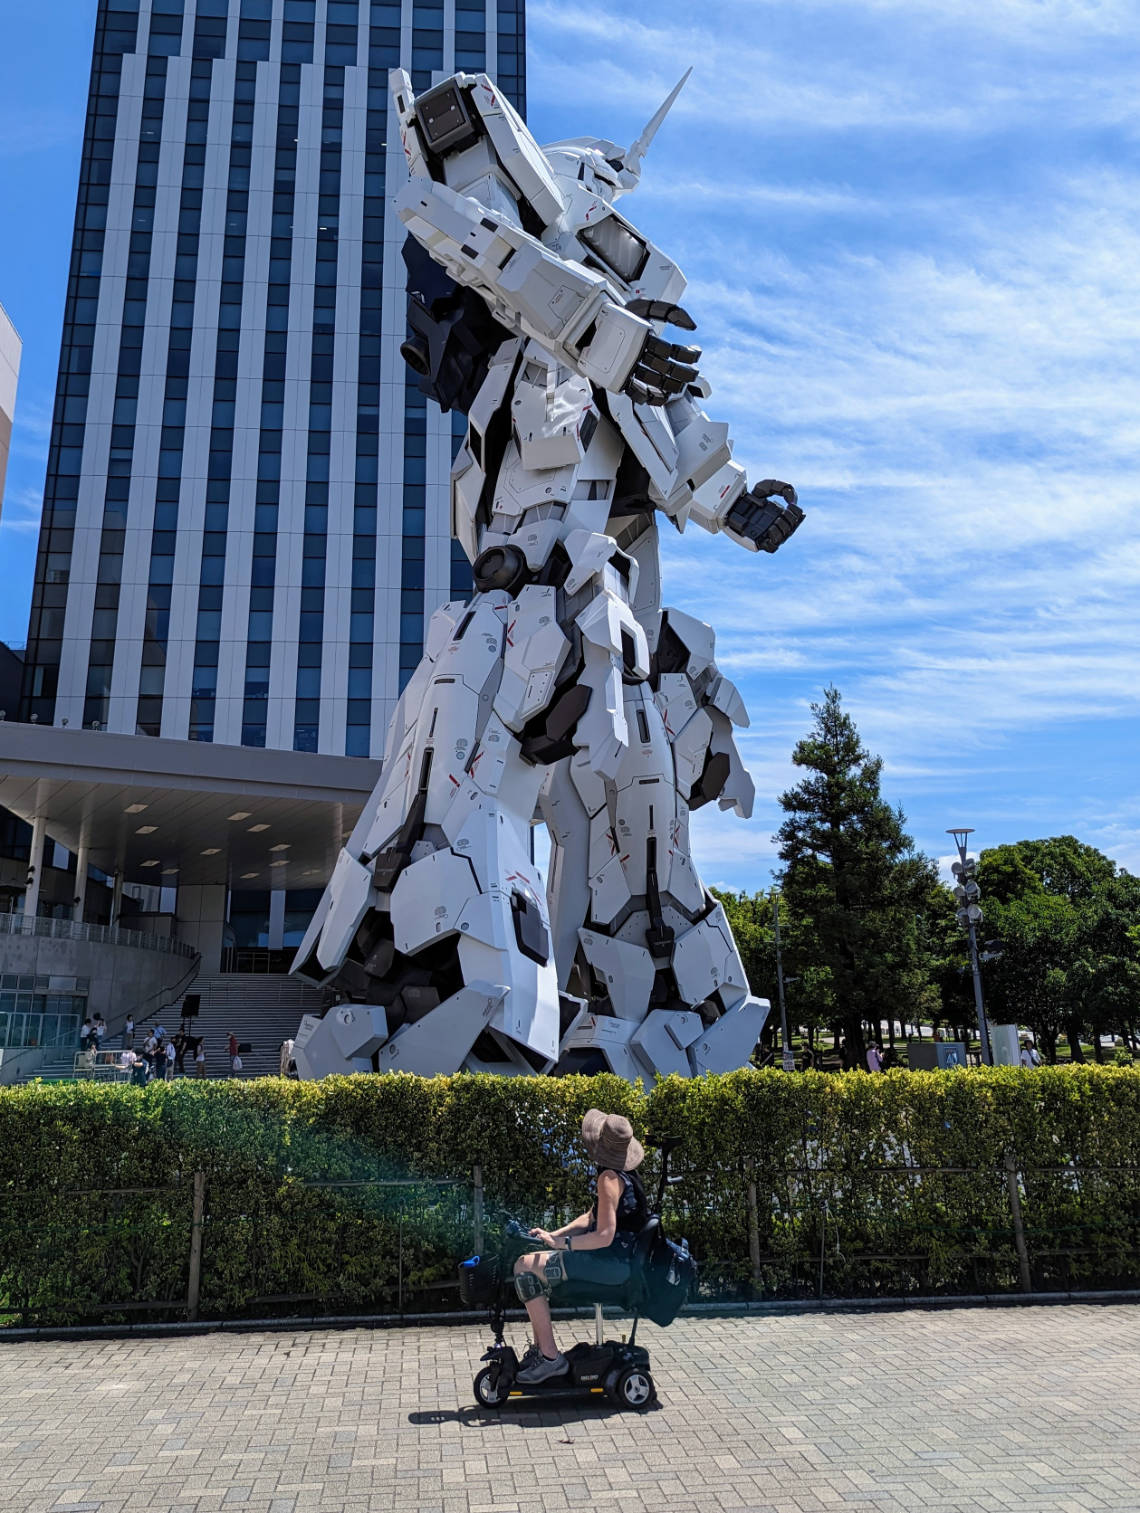 Anne de Ridder in her mobility scooter with a giant Gundam